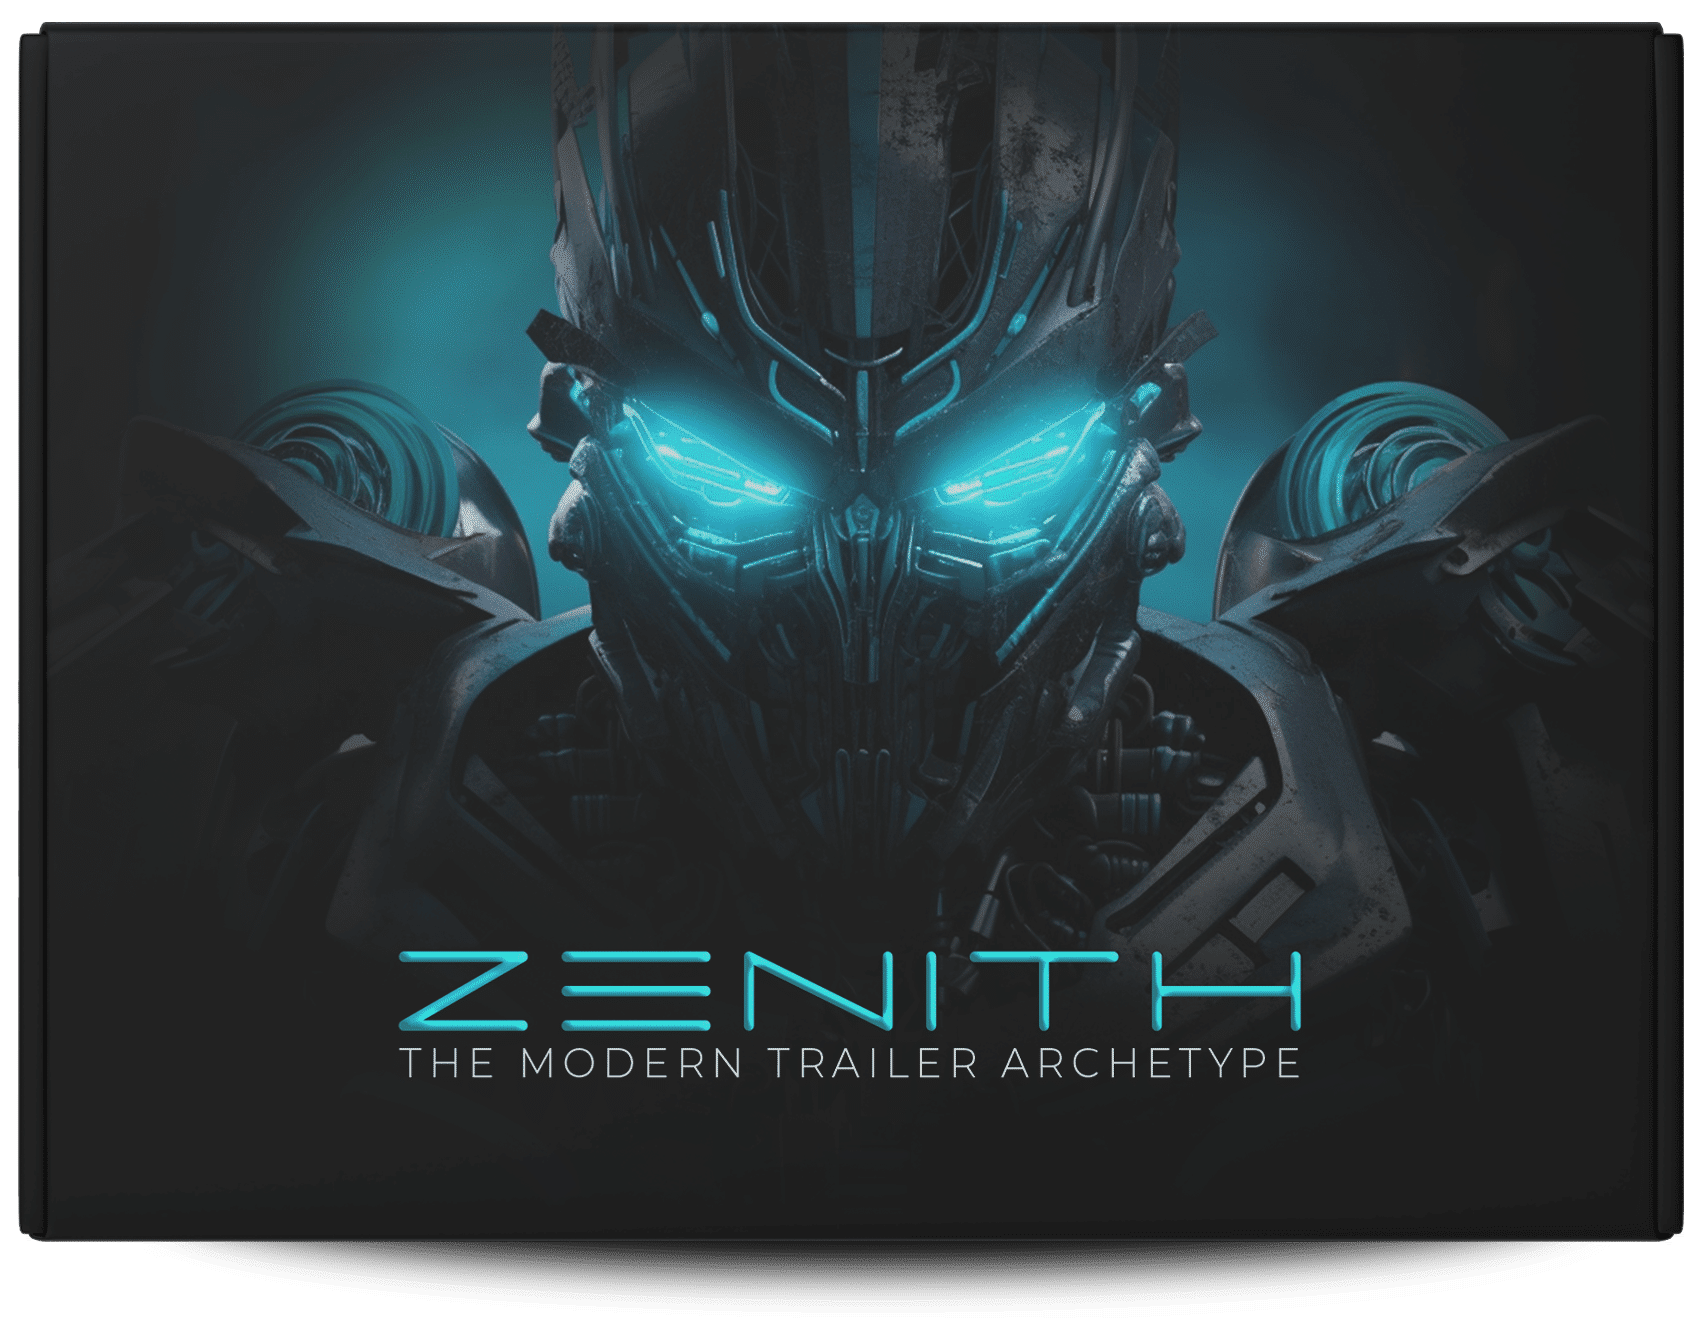 75% off “Zenith” by Cinematic Tools